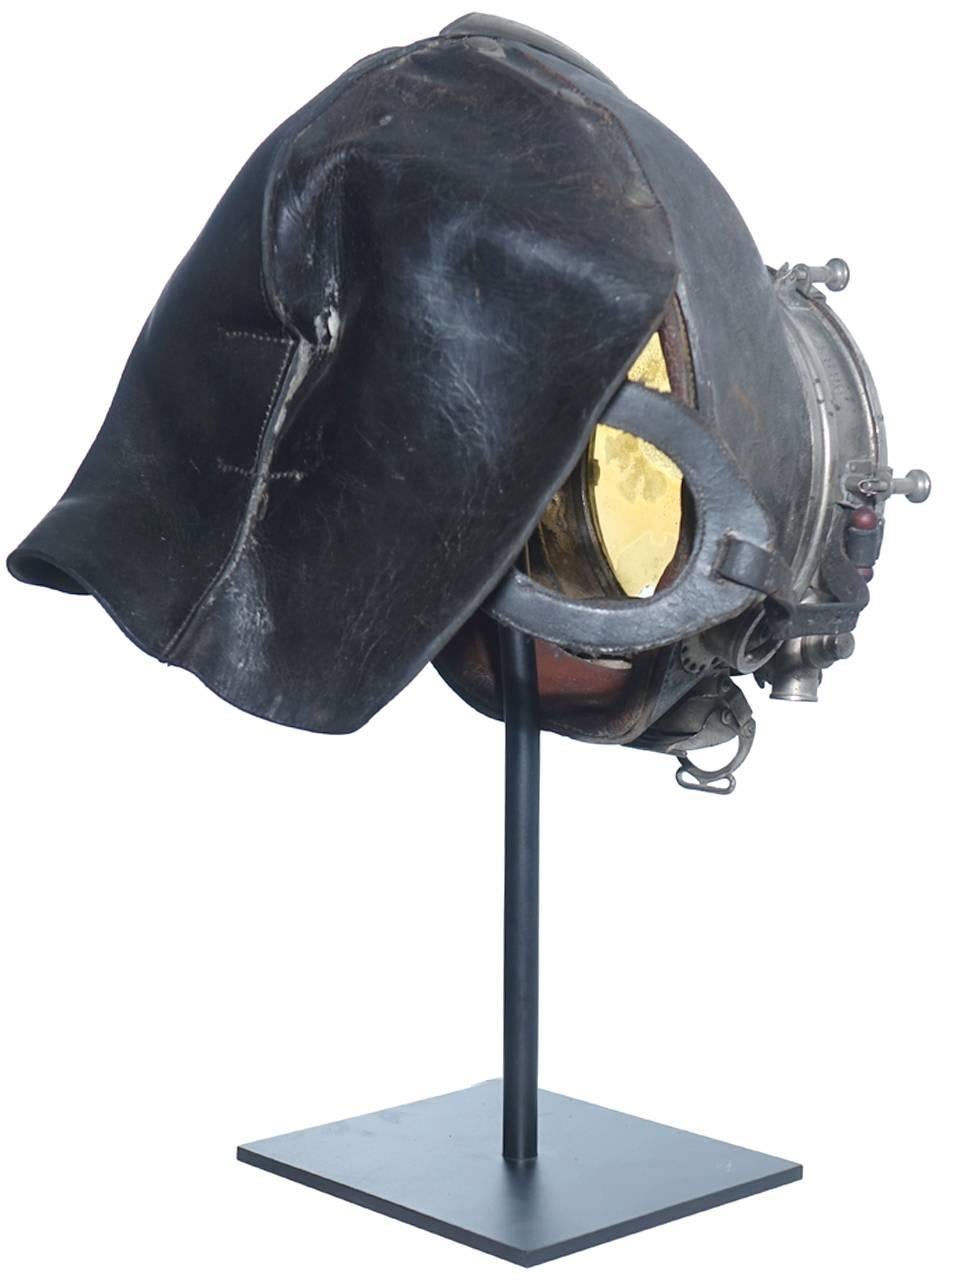 German Very Rare and Important 1910 Drager Smoke Mask